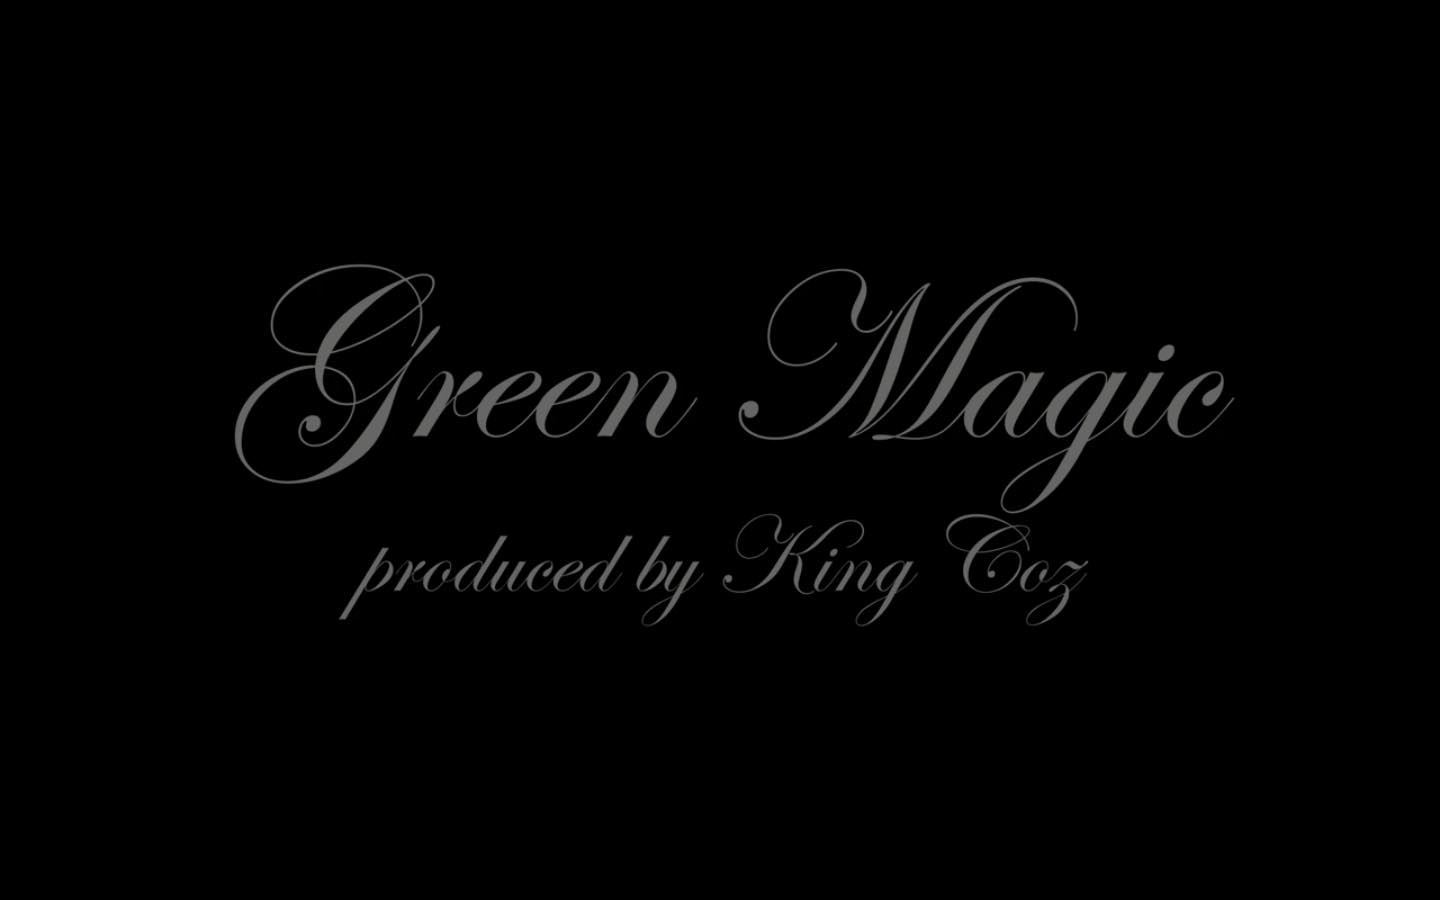 D. Rose<br> a/k/a Kashmere Don <br> “Green Magic” featuring D. Randle <br>Produced by King Coz